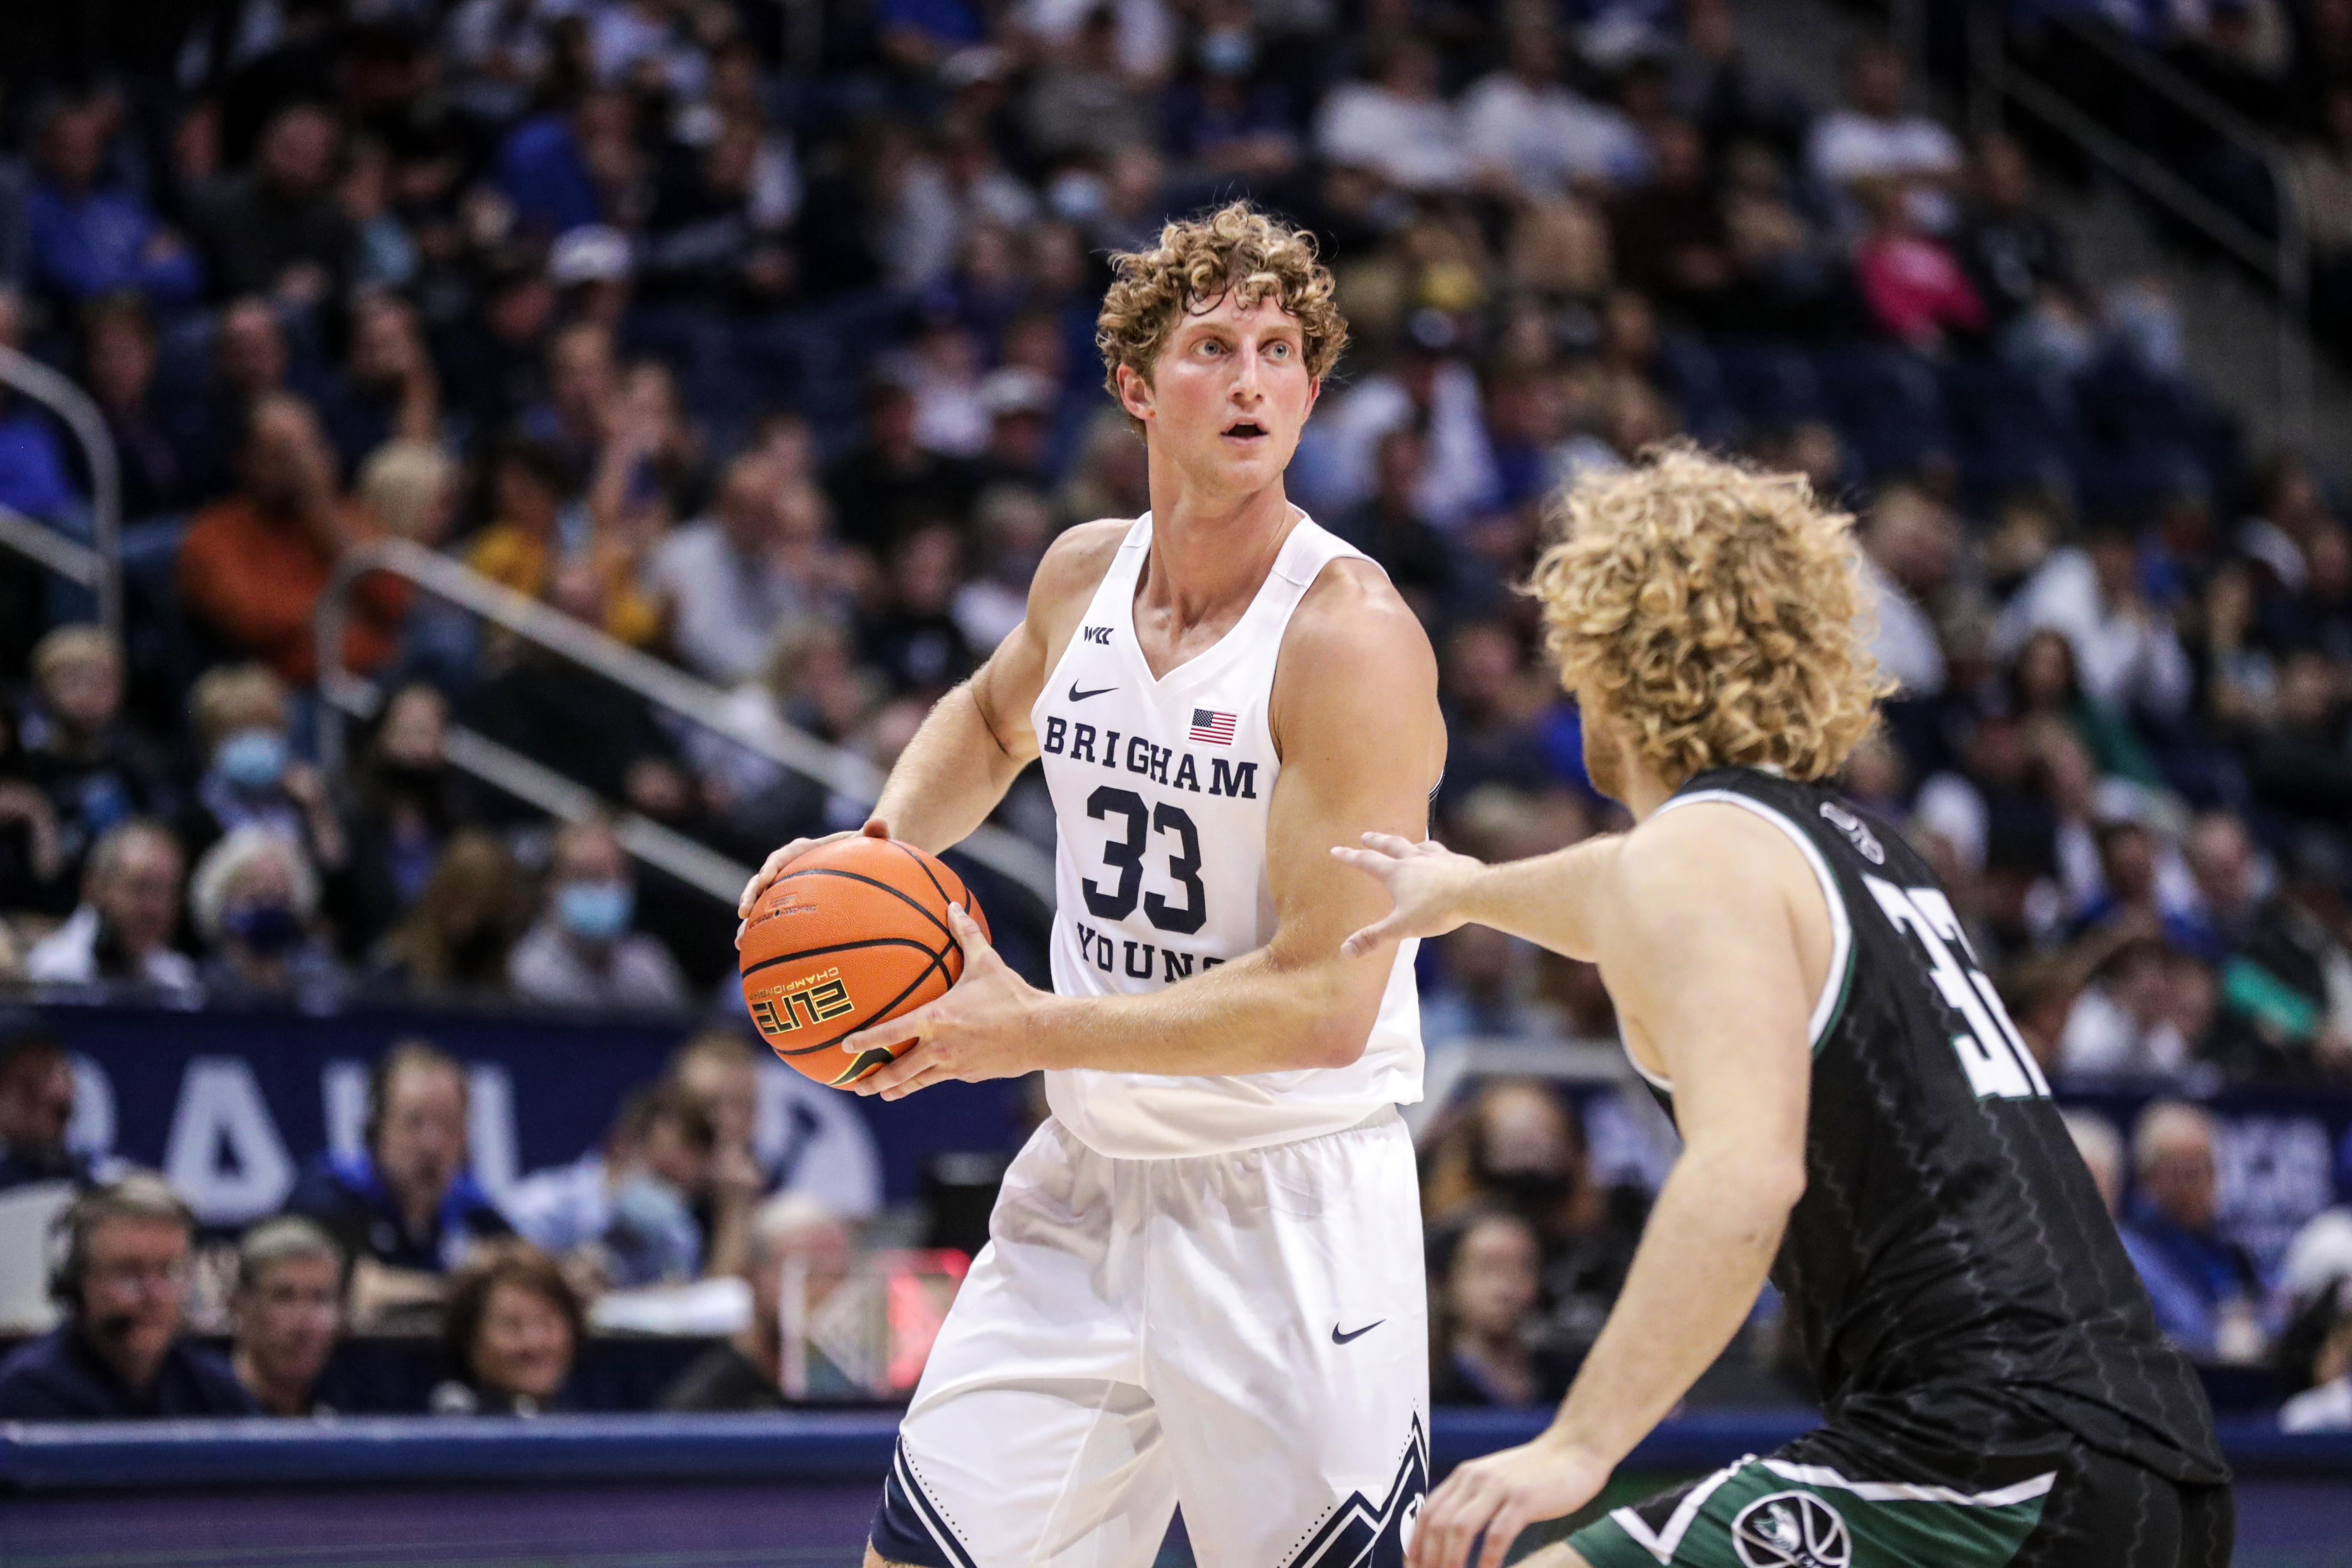 BYU basketball player Caleb Lohner surveys the court in the Cougars 97-61 victory over Central Methodist University.